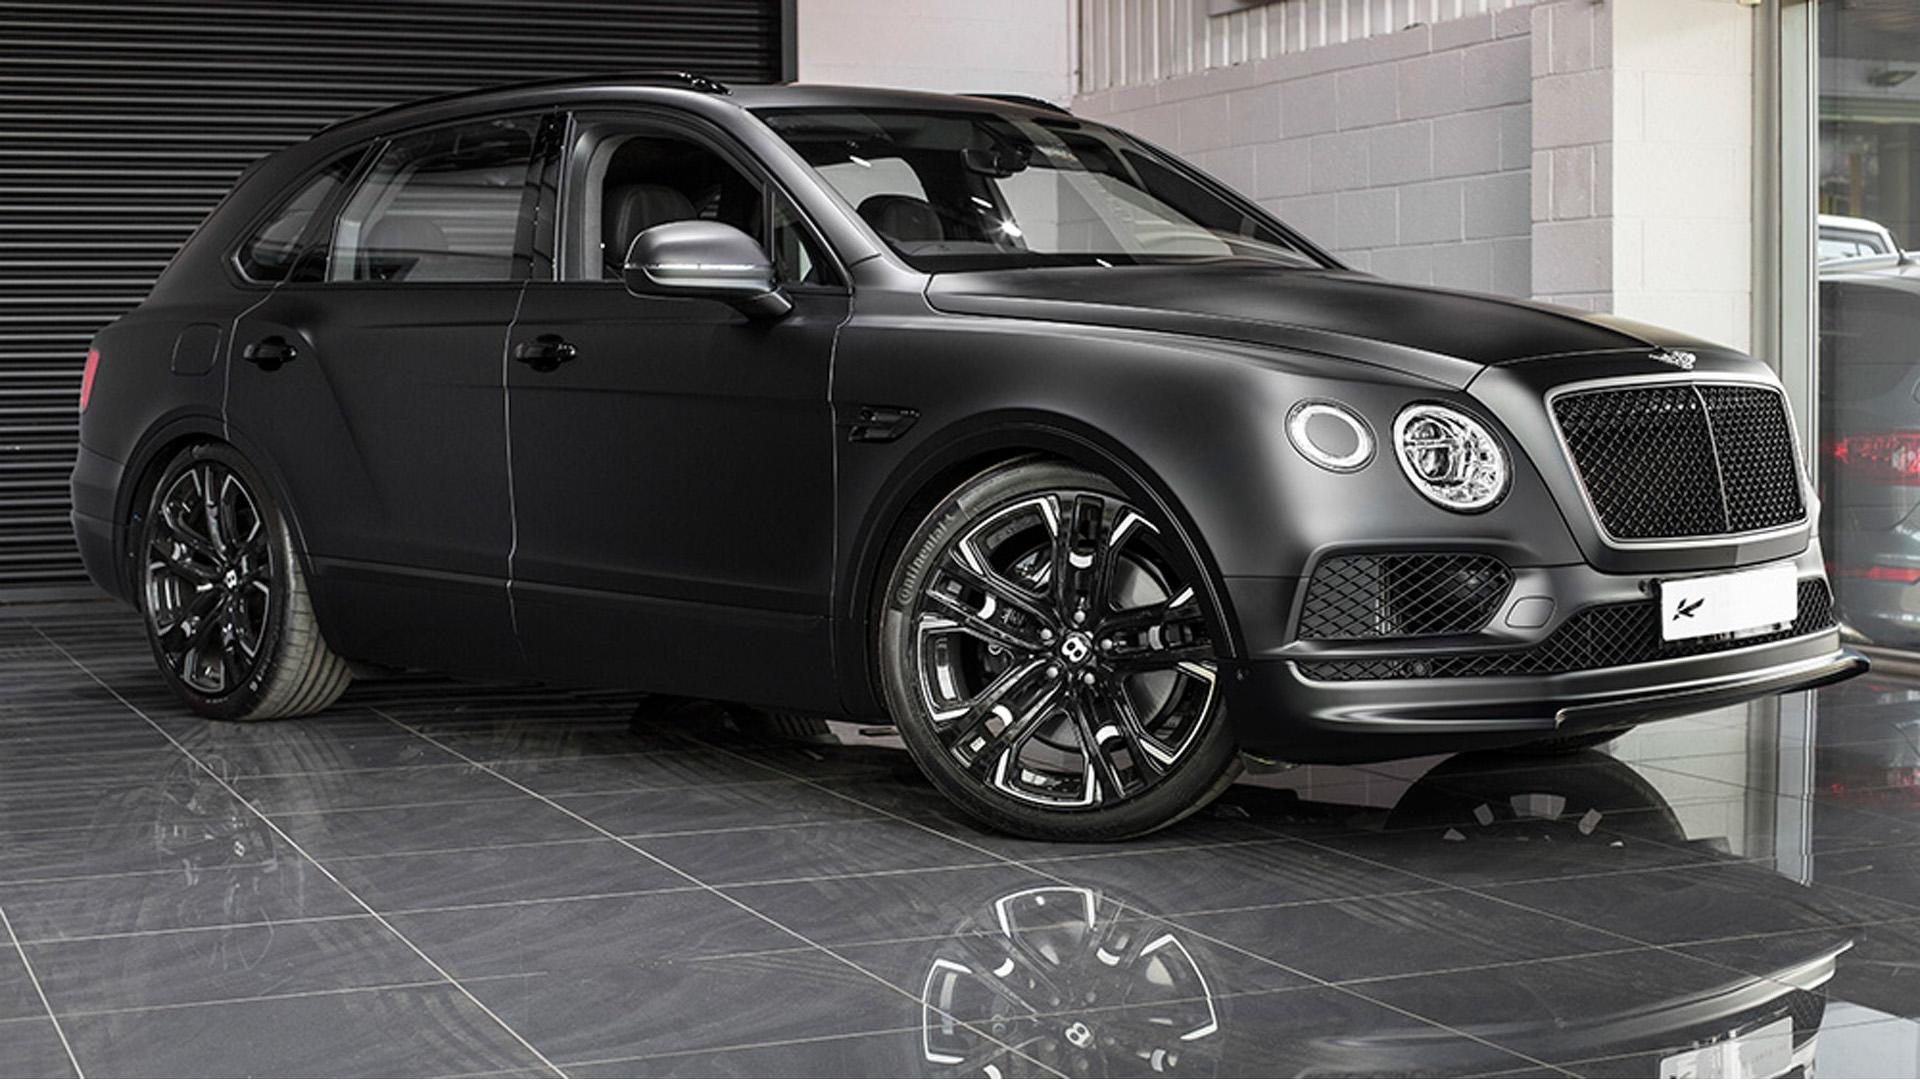 images-products-1-7687-232988167-bentley-bentayga-tuned-by-kahn-design-le-mans-edition-takes-no-prisoners-120439_1.jpg